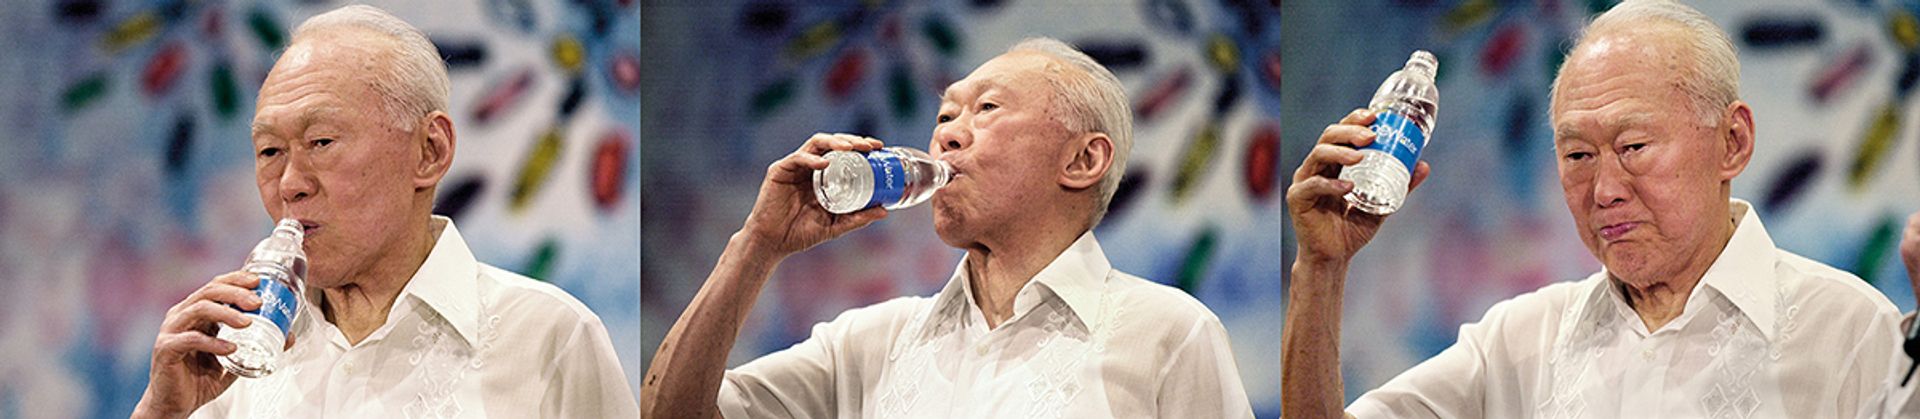 Mr Lee drinking Newater at a National Day dinner on Aug 16, 2002, to help Singaporeans overcome their psychological barrier against the purified used water product. ST Photos: Thomas White